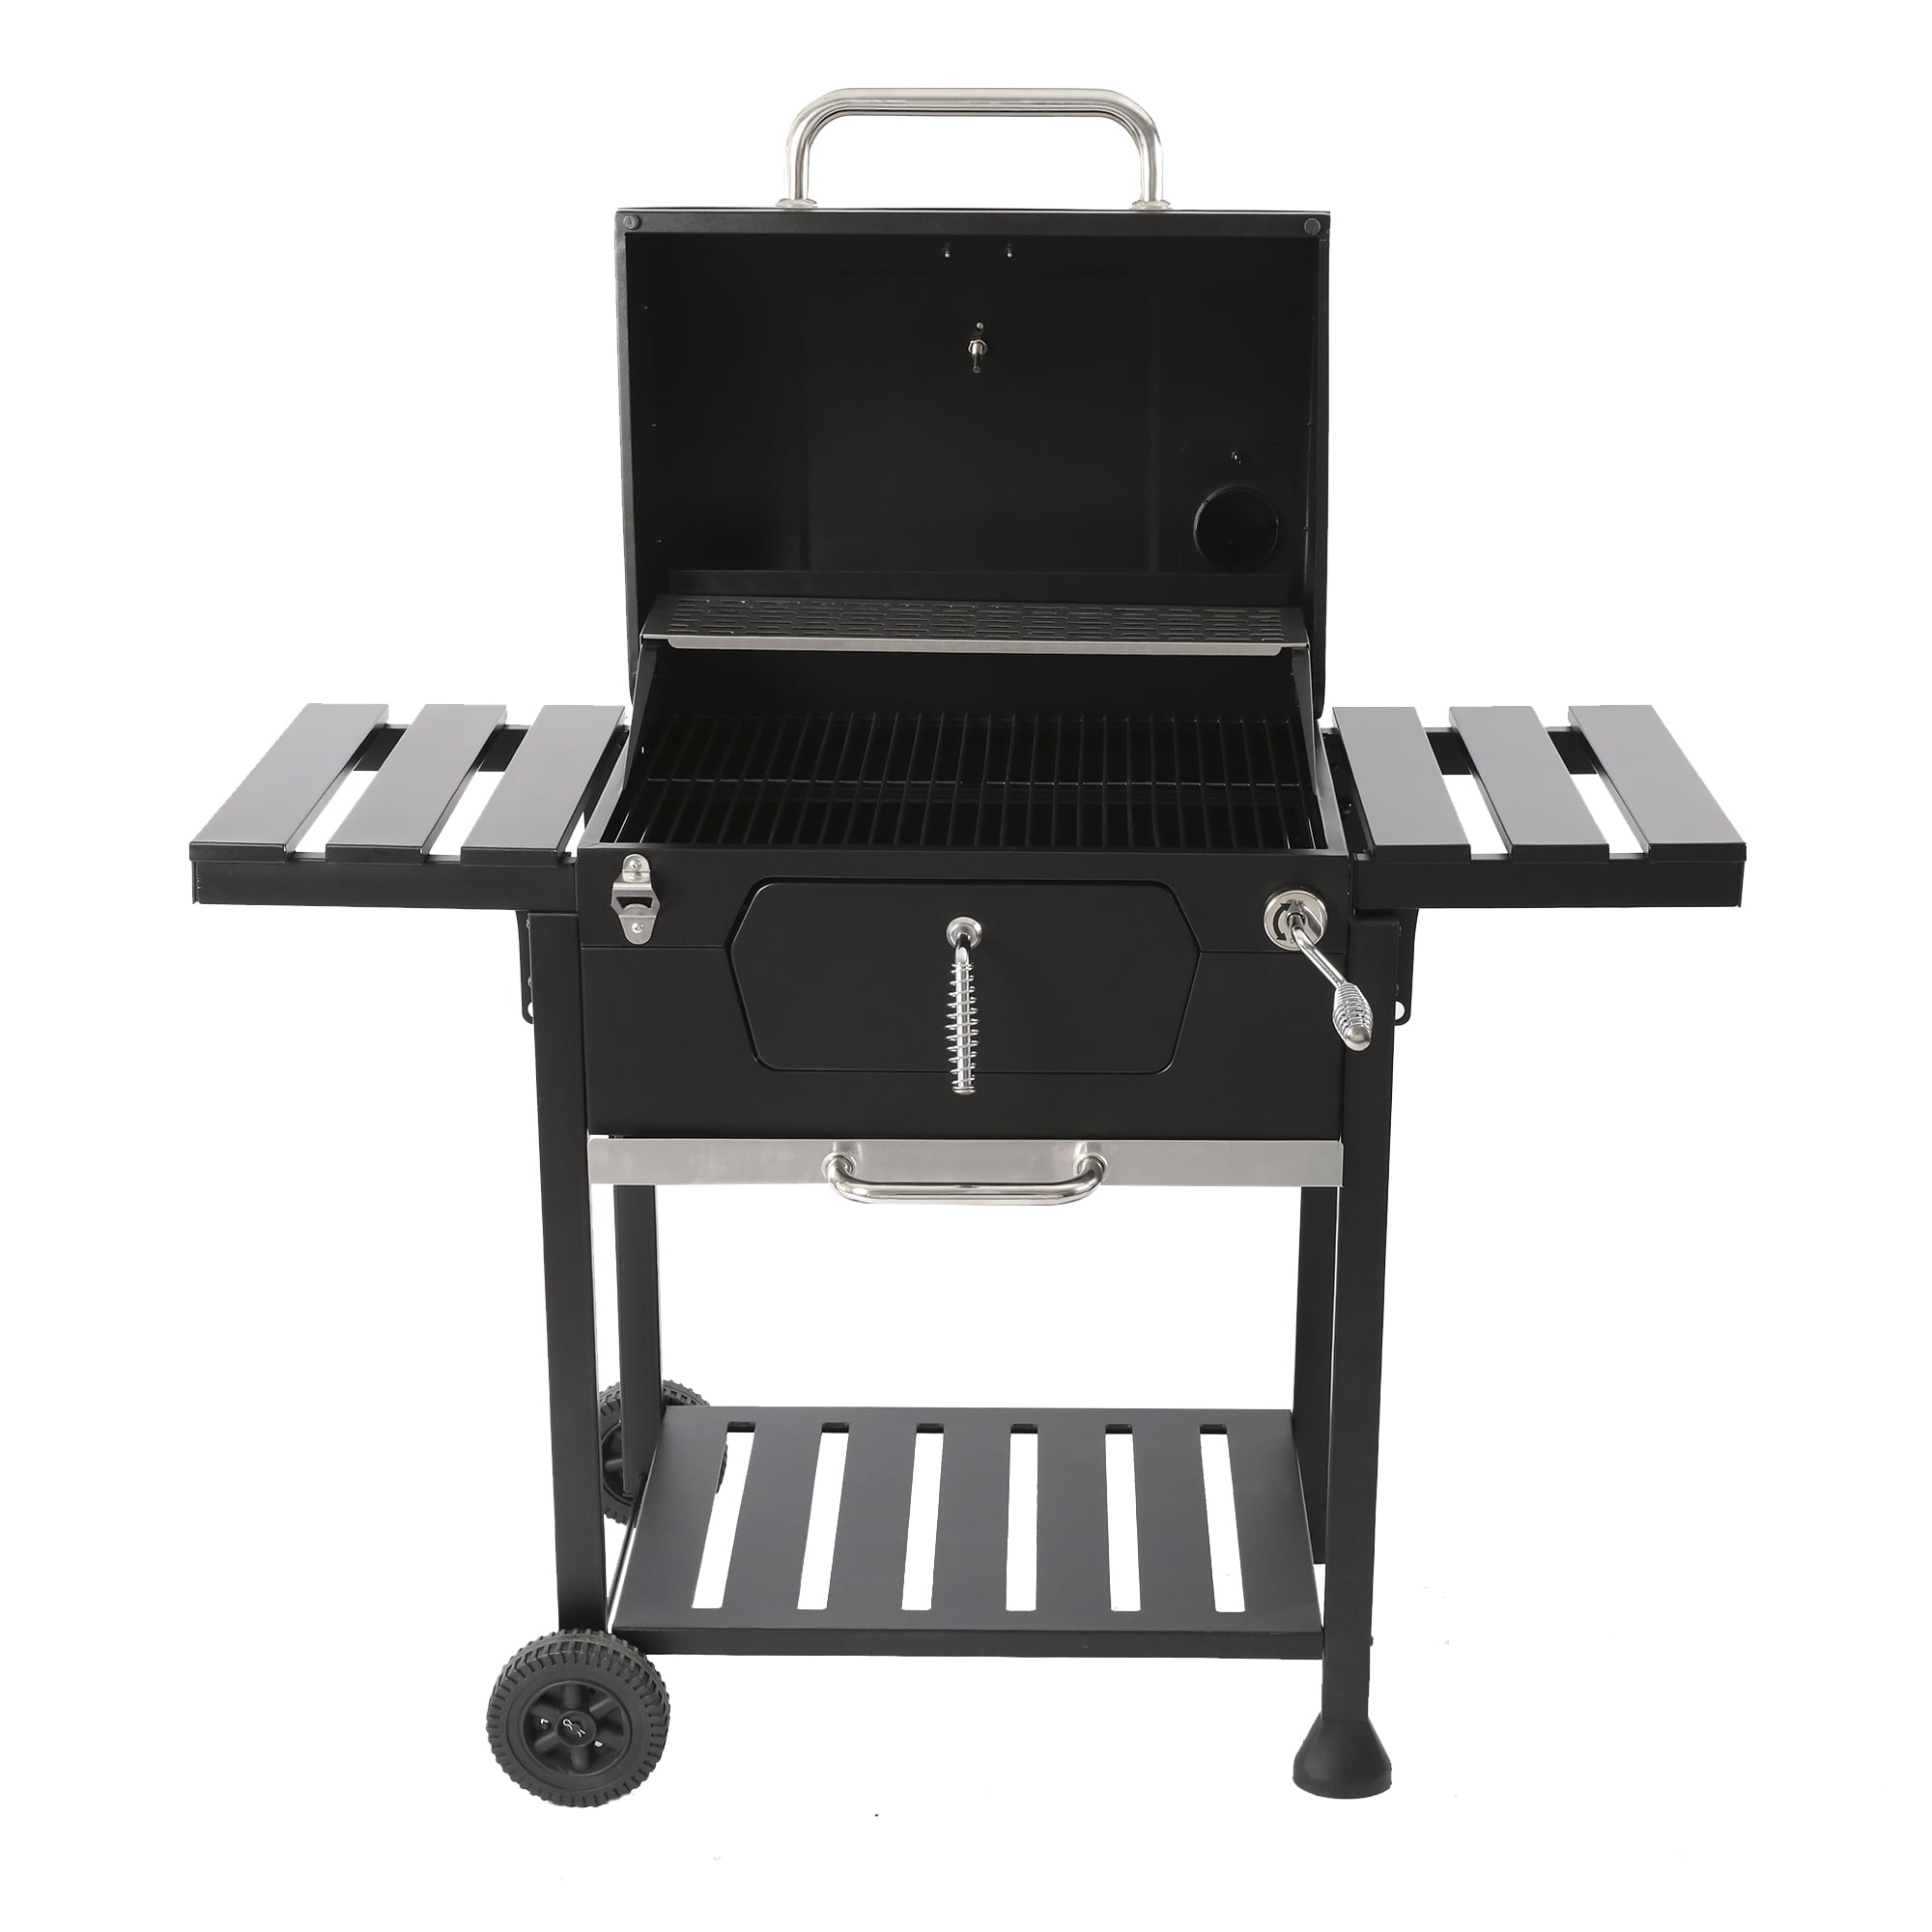 Set barbecue Deluxe, argent-01894021-00000